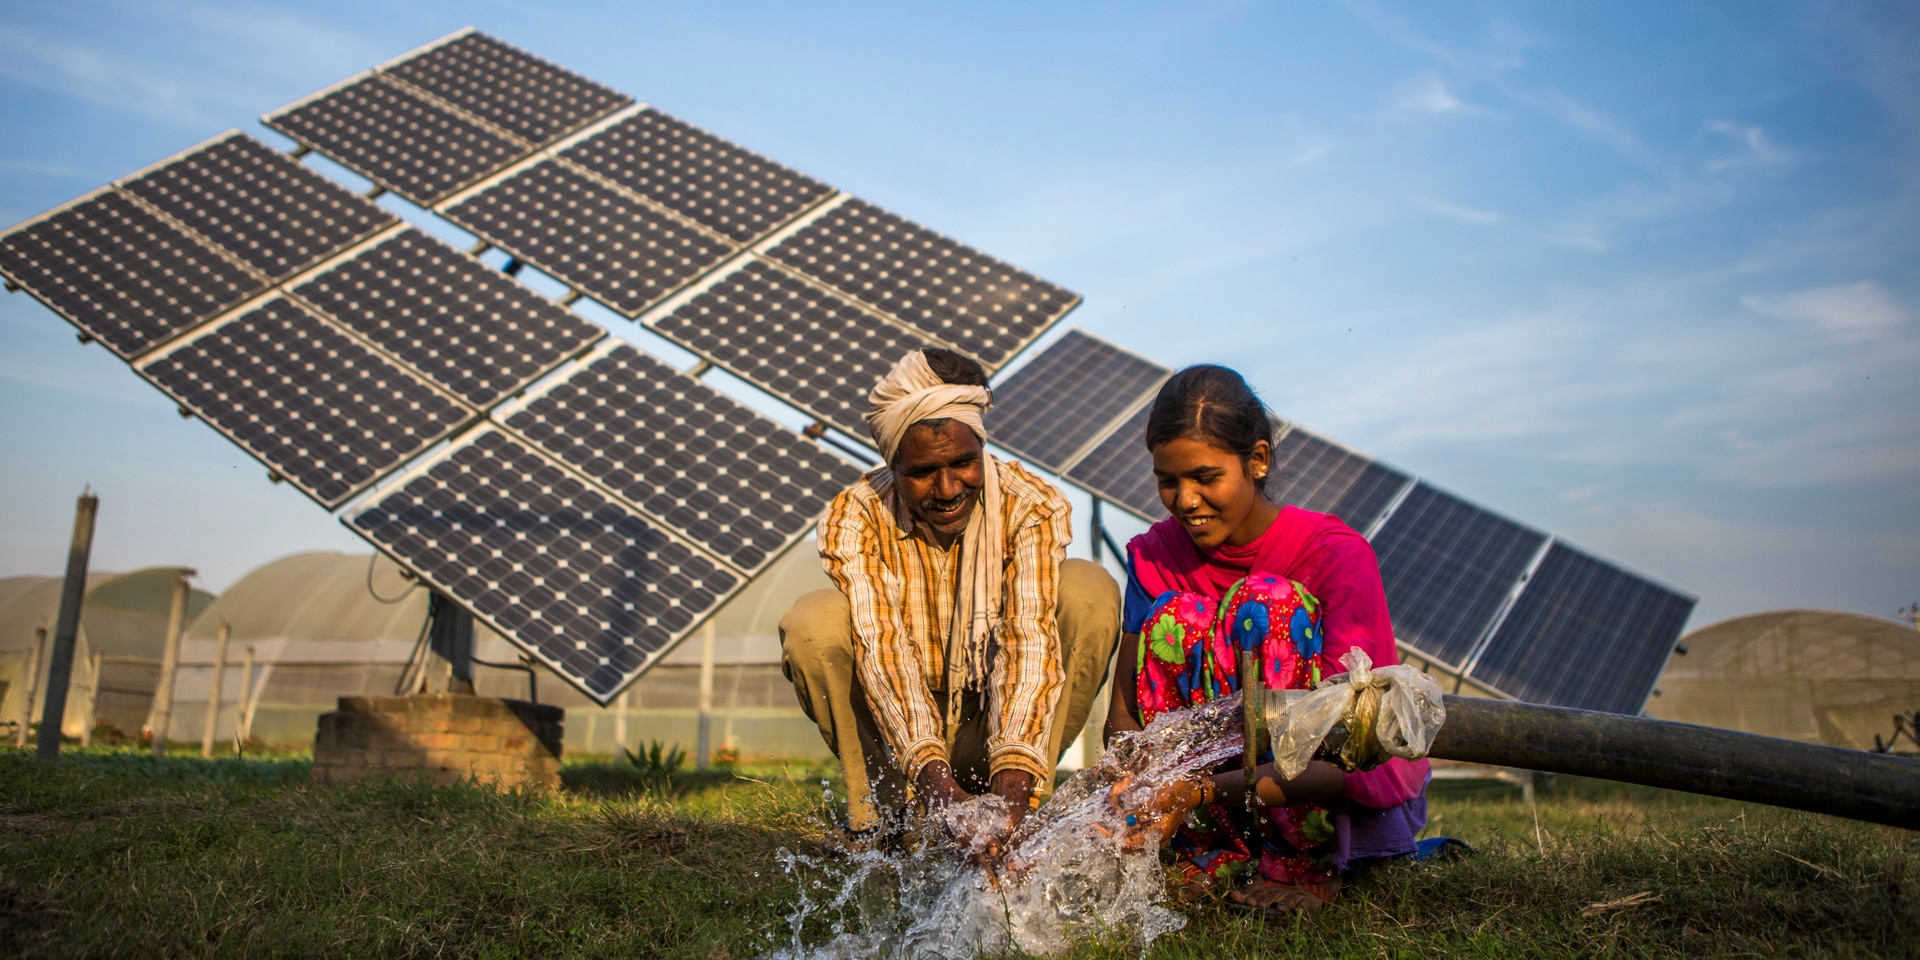 A man and woman in the Global South sit at a water pipe in front of an array of solar panels.